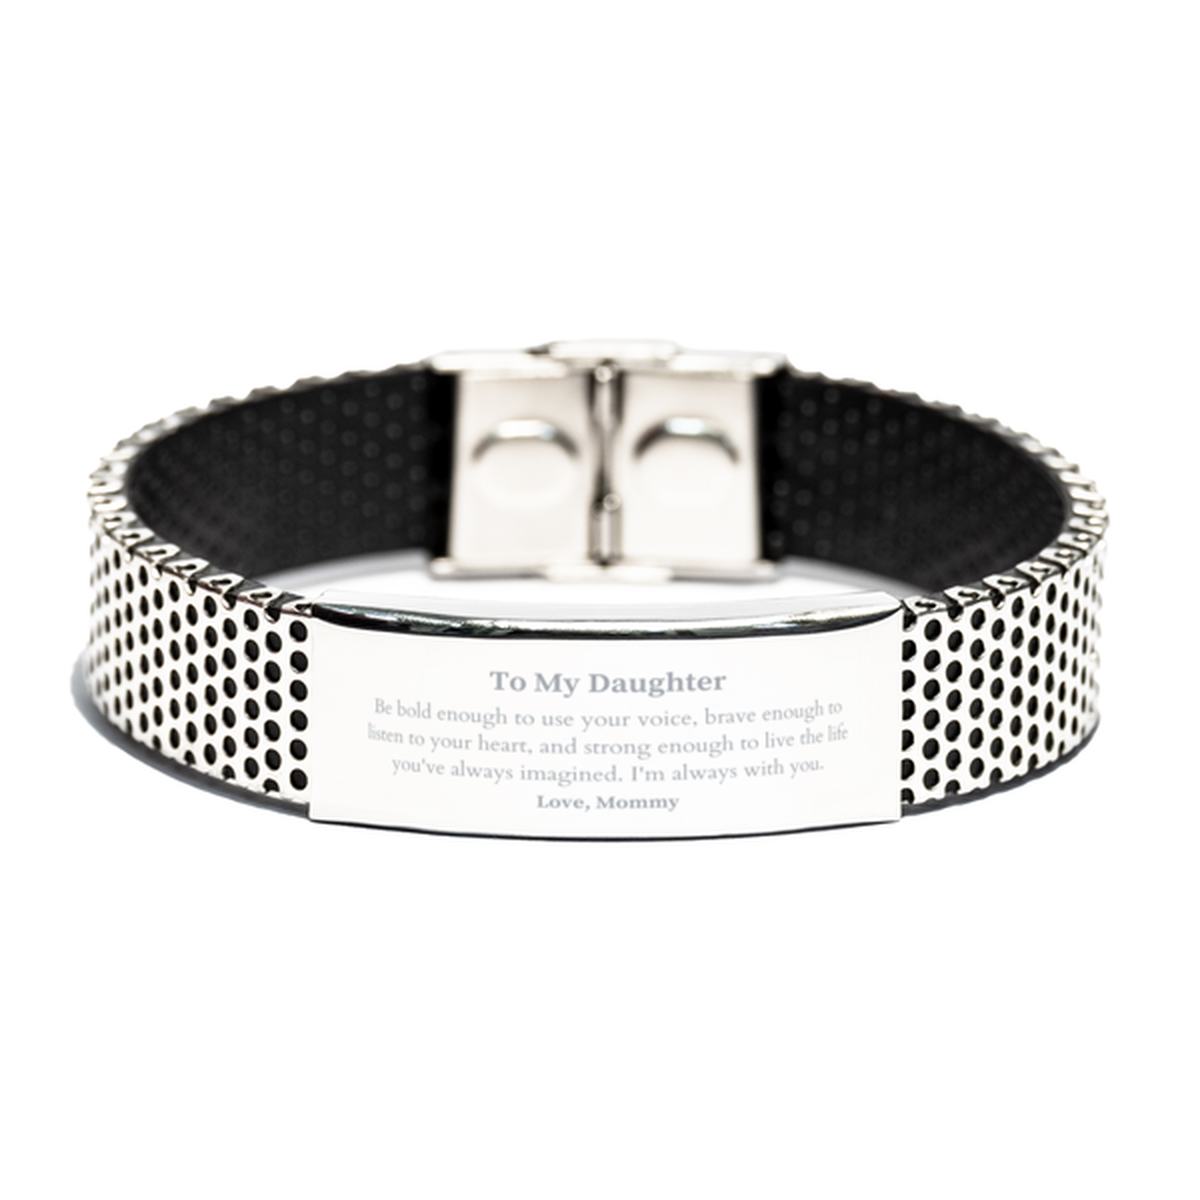 Keepsake Daughter Stainless Steel Bracelet Gift Idea Graduation Christmas Birthday Daughter from Mommy, Daughter Be bold enough to use your voice, brave enough to listen to your heart. Love, Mommy